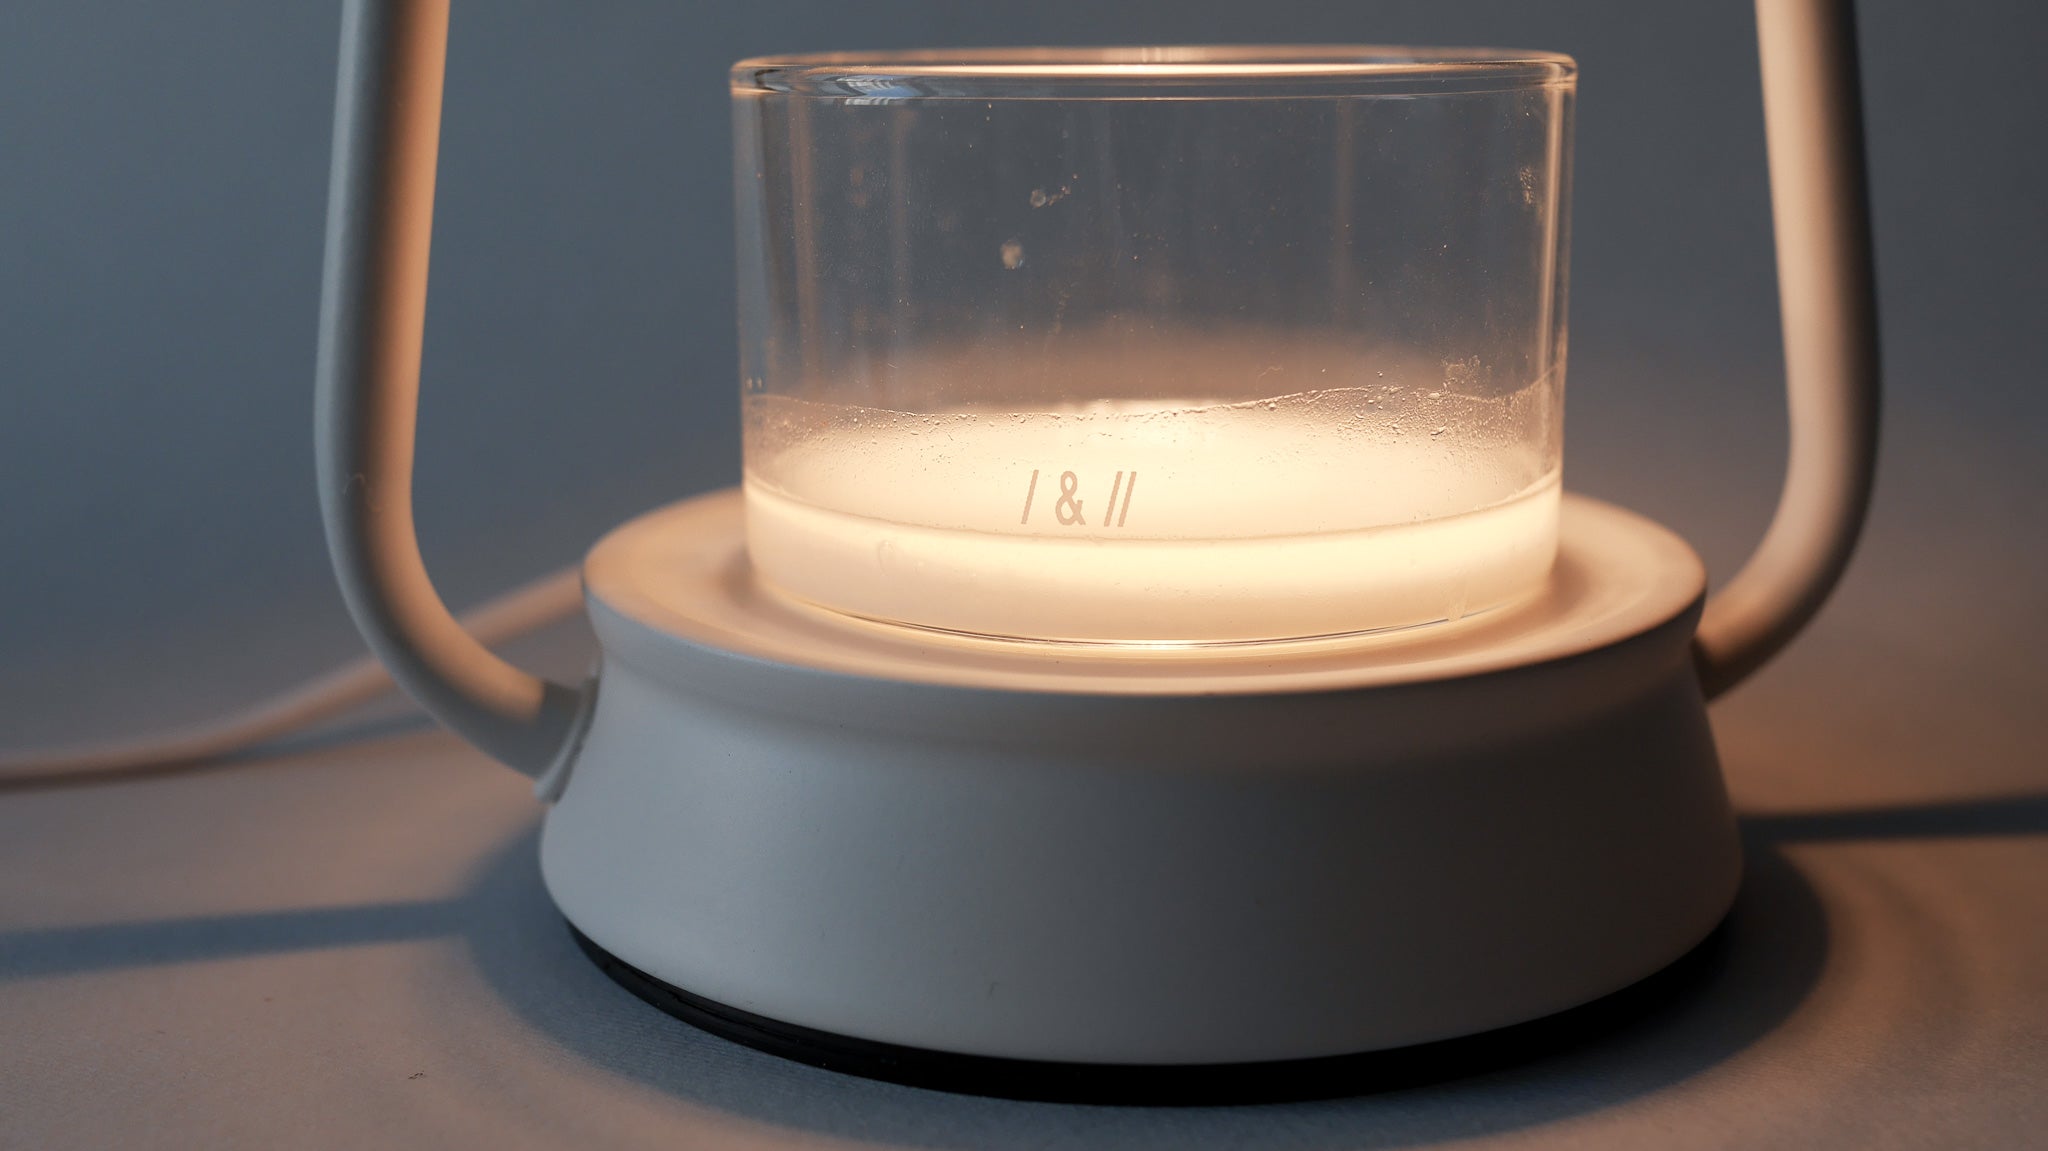 candle warmer lamp / camping light white //